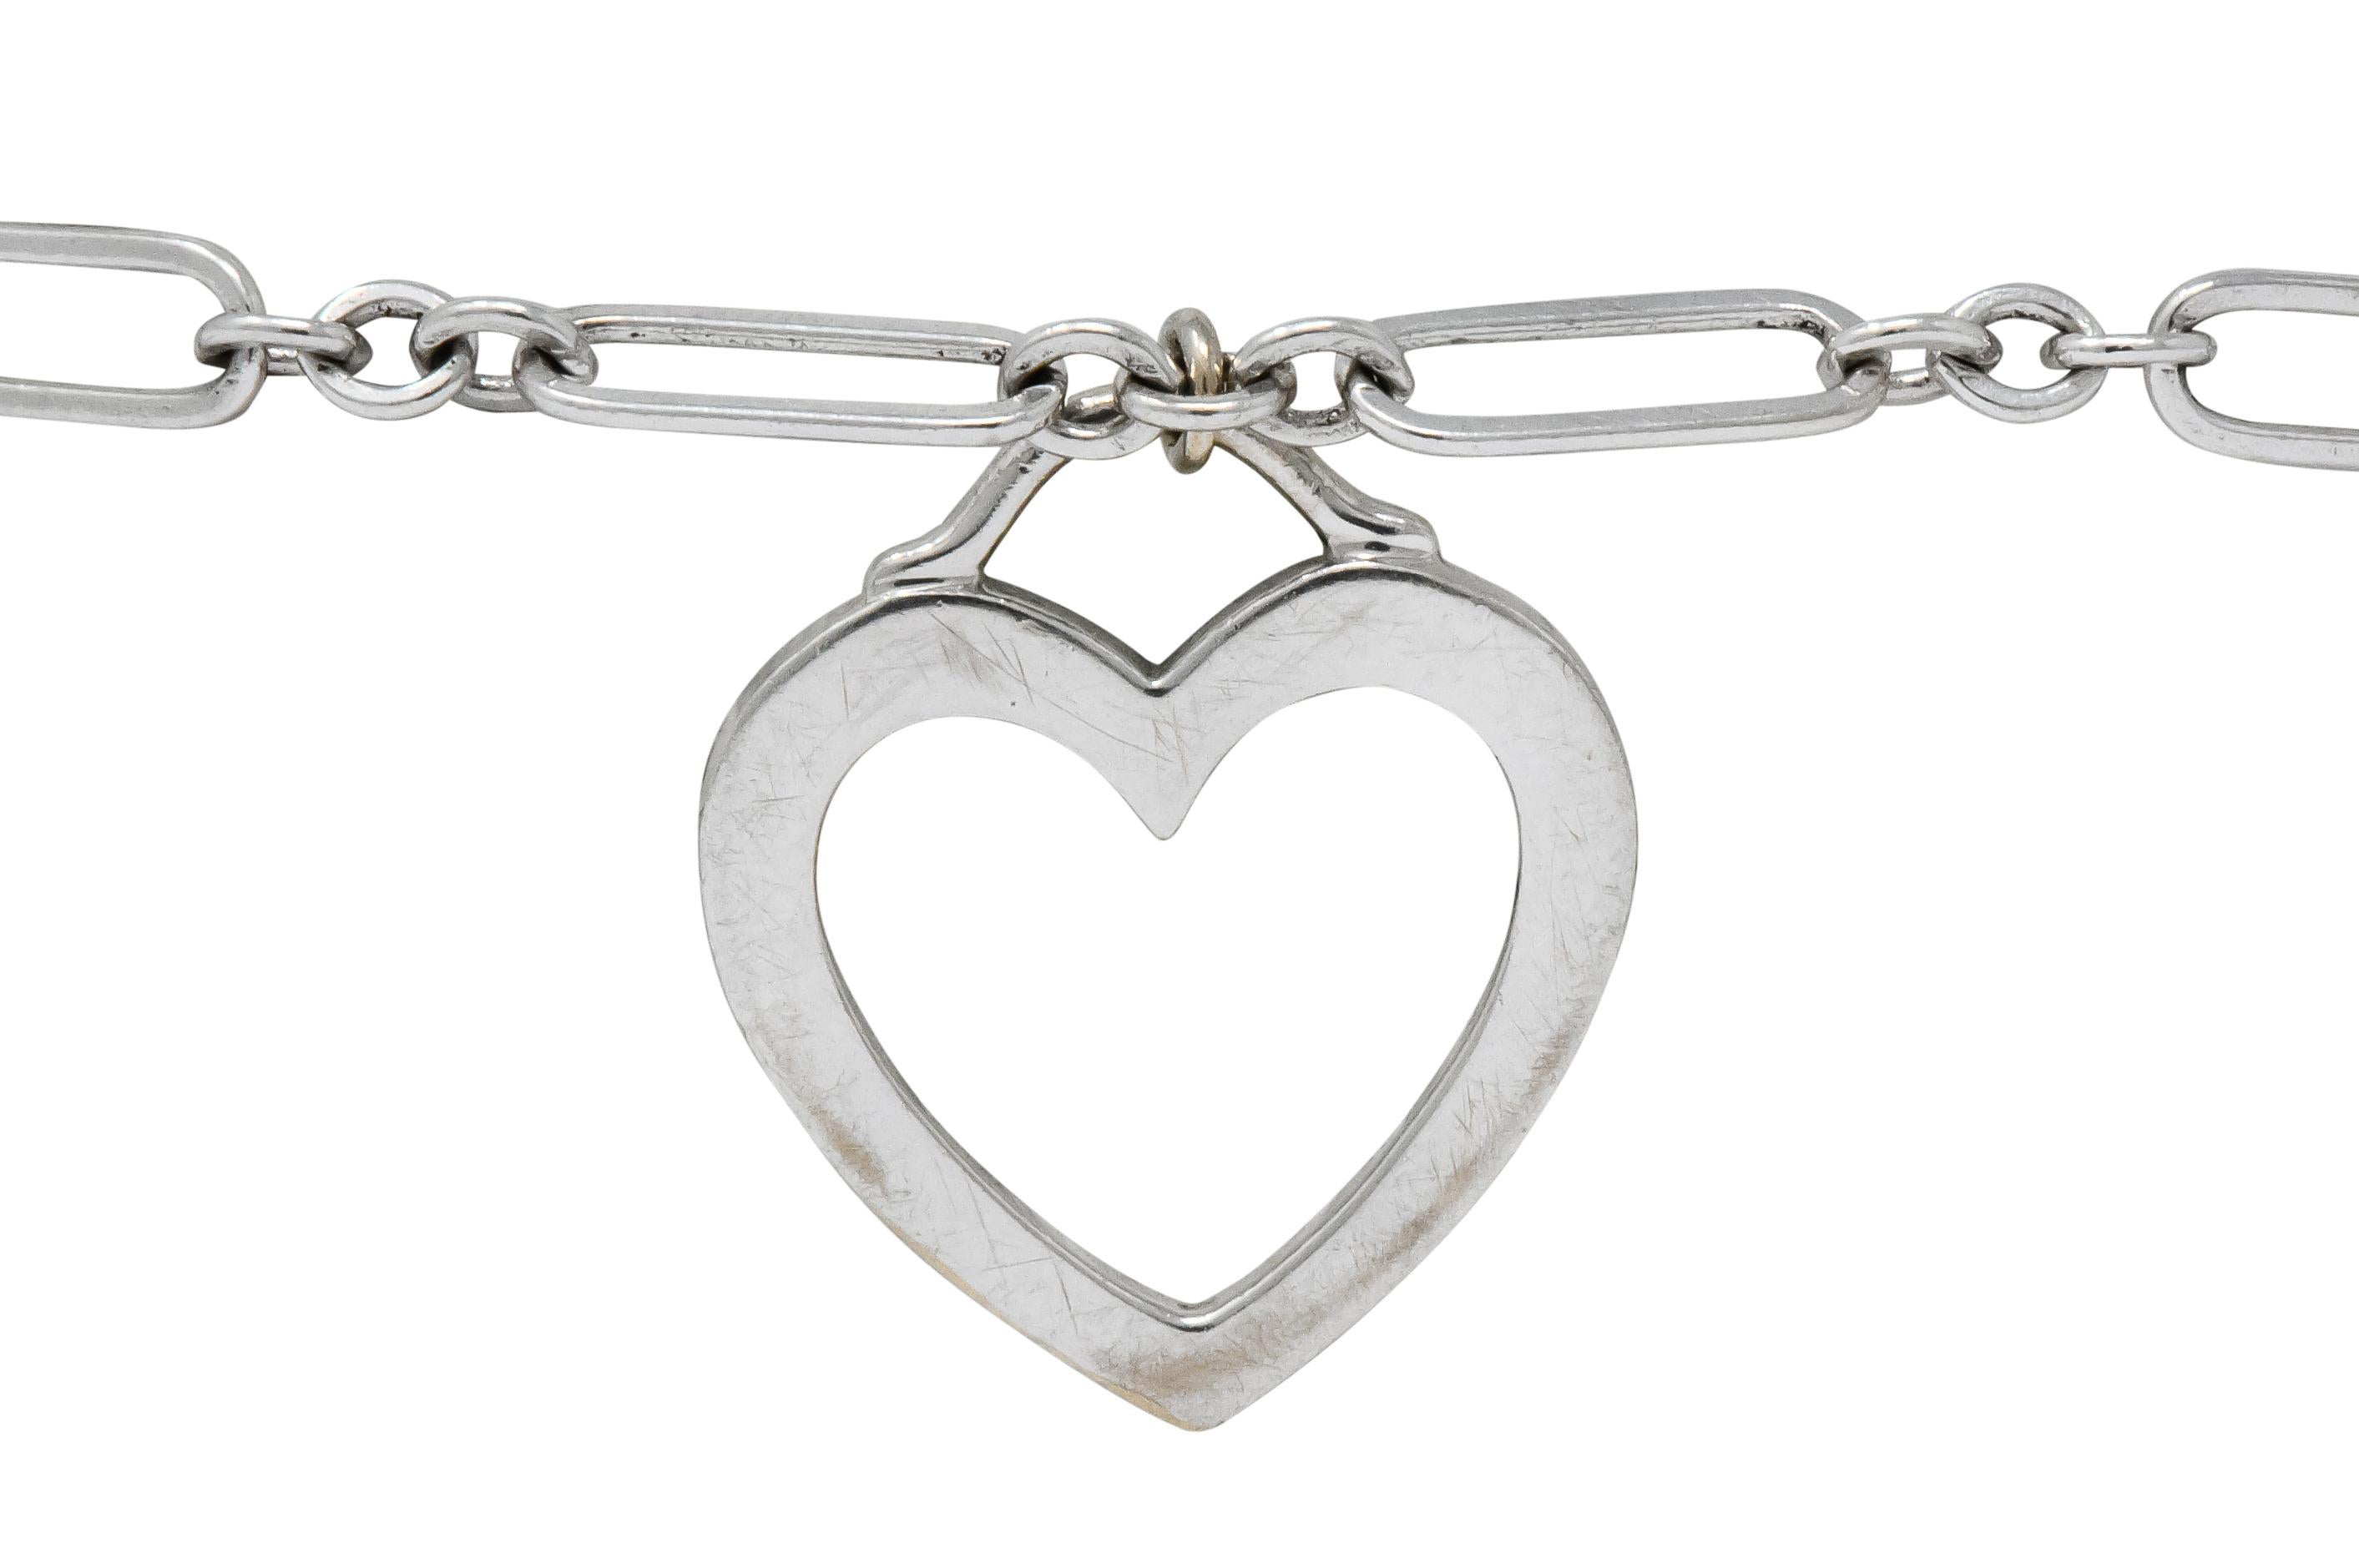 Bracelet features elongated links separated by three jump ring spacer links

With open heart charm suspended by arched bale

Completed by spring ring clasp

Signed Tiffany & Co. and stamped 750, for 18 karat white gold

Length: 7 inches

Heart